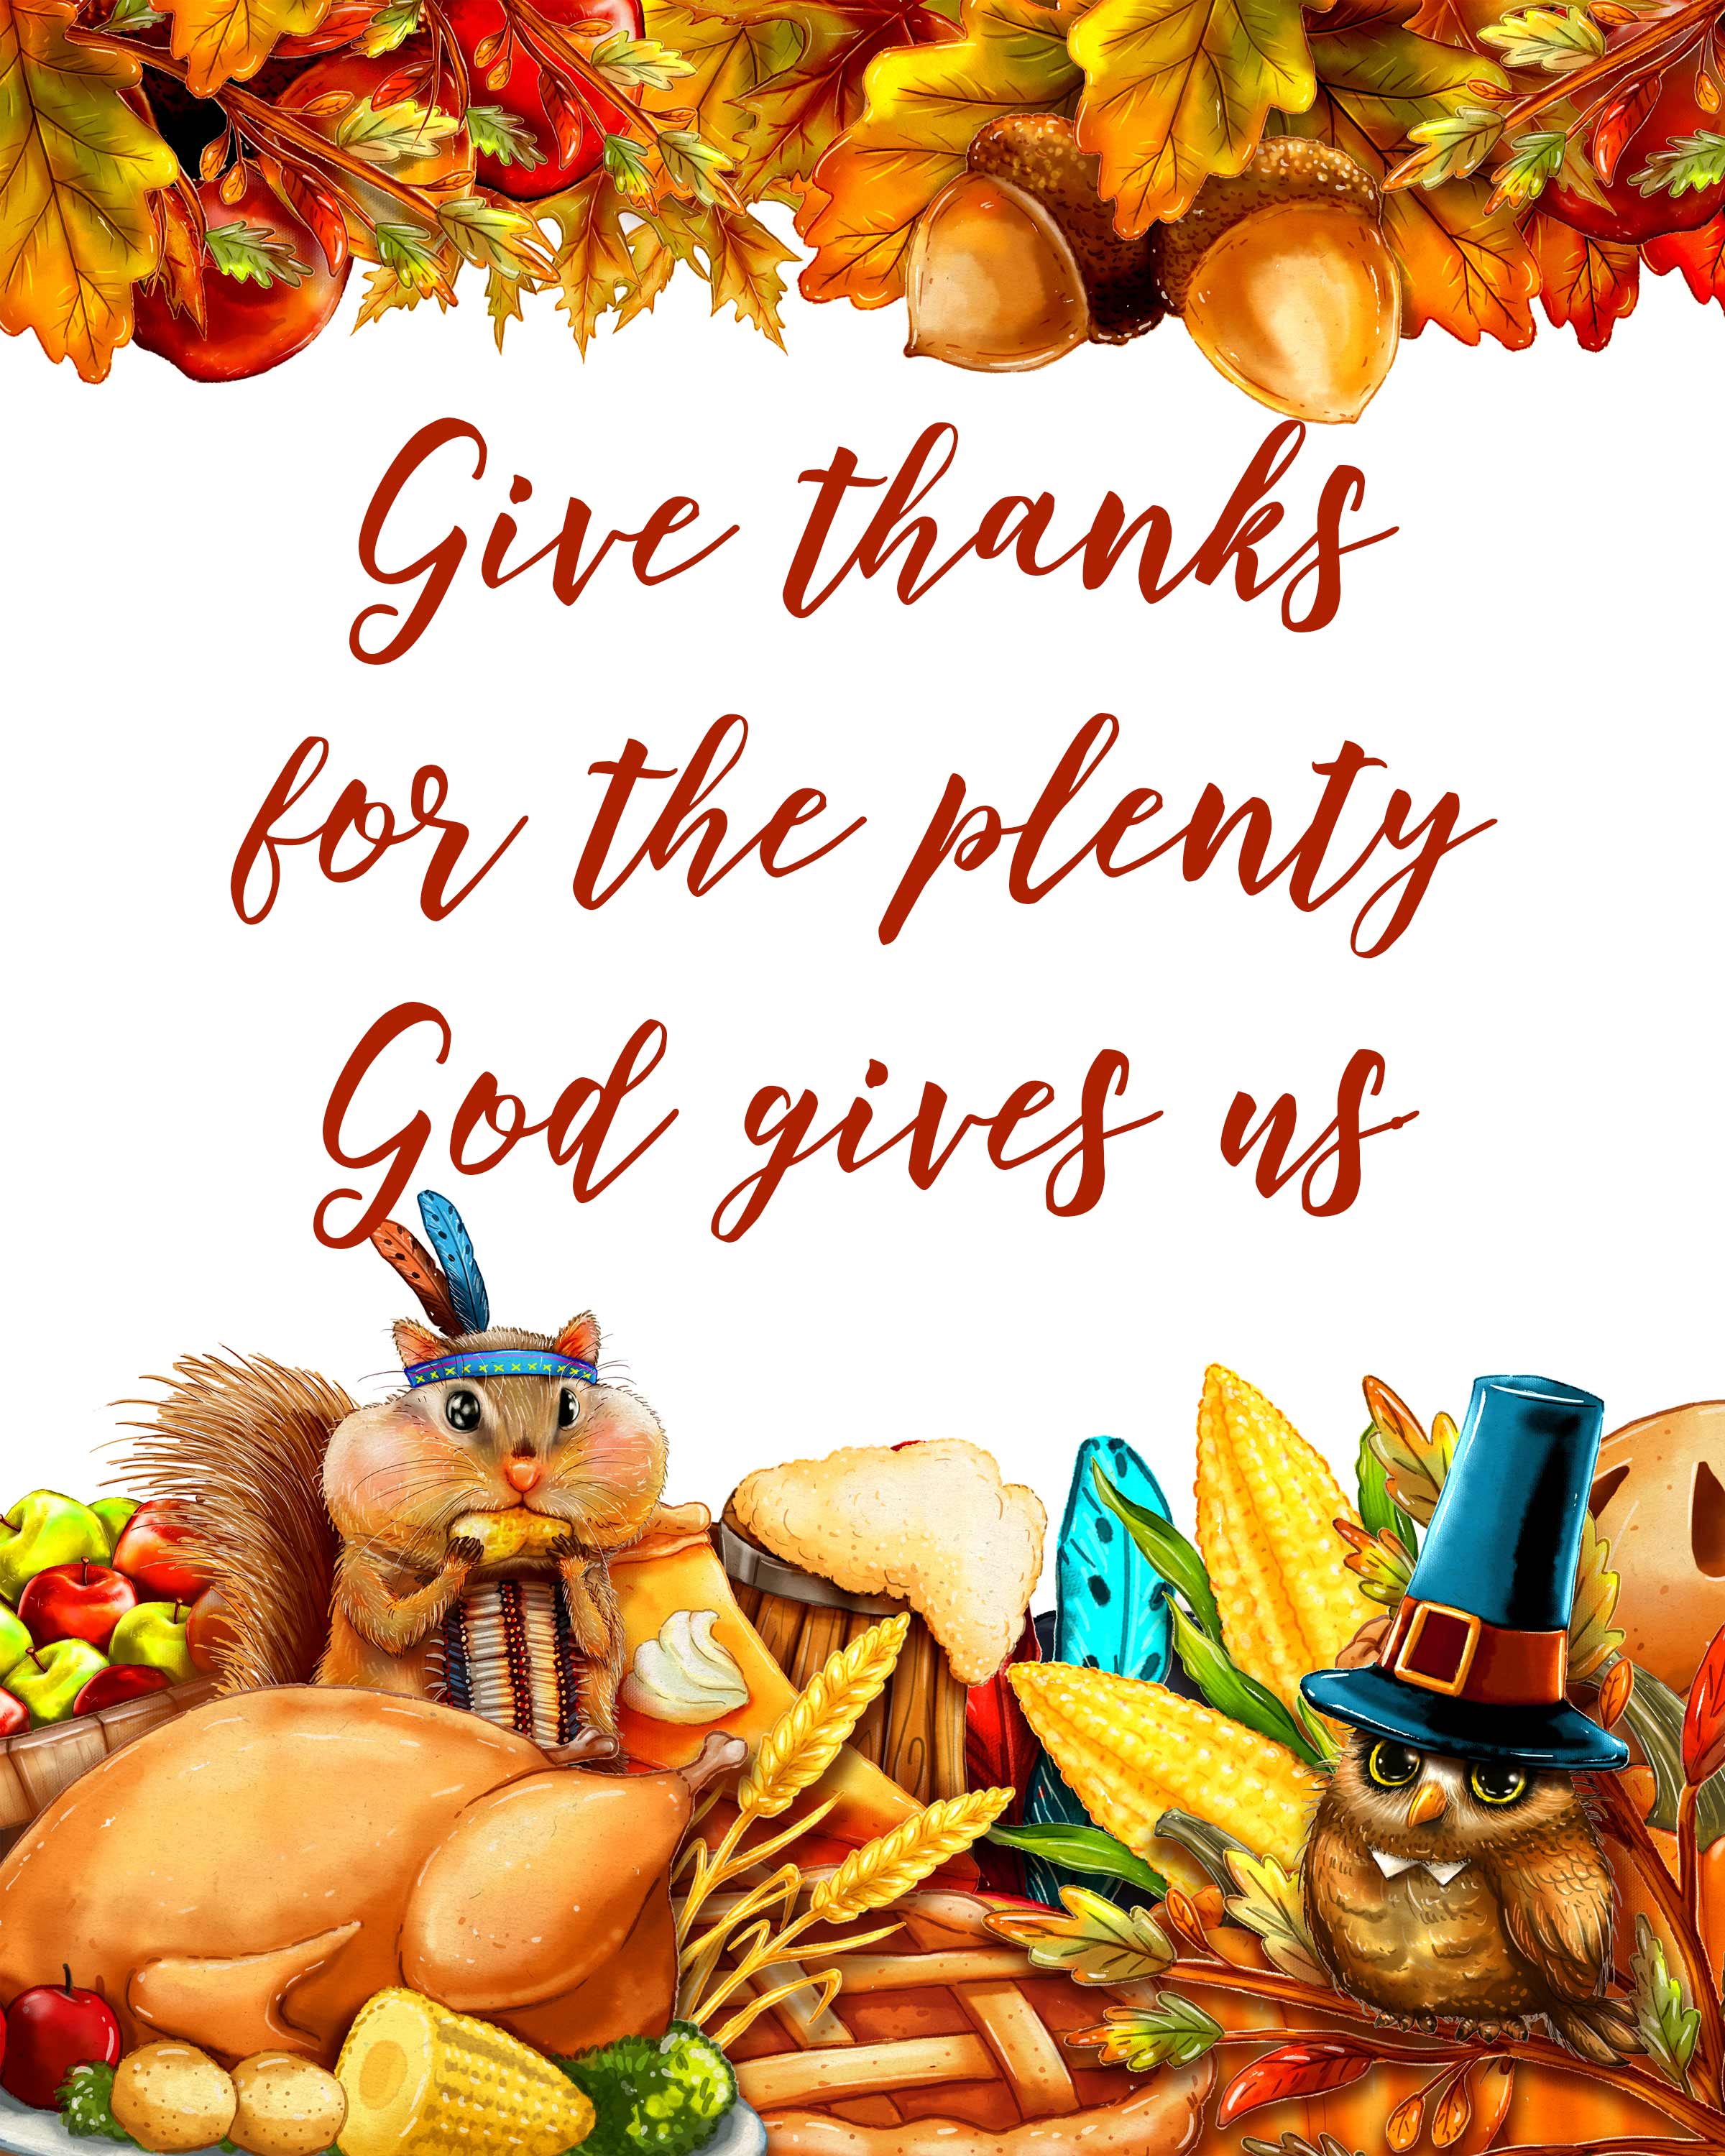 4 Gorgeous Free Printable Thanksgiving Wall Art Designs - Thanksgiving Arts & Crafts Ideas For Adults